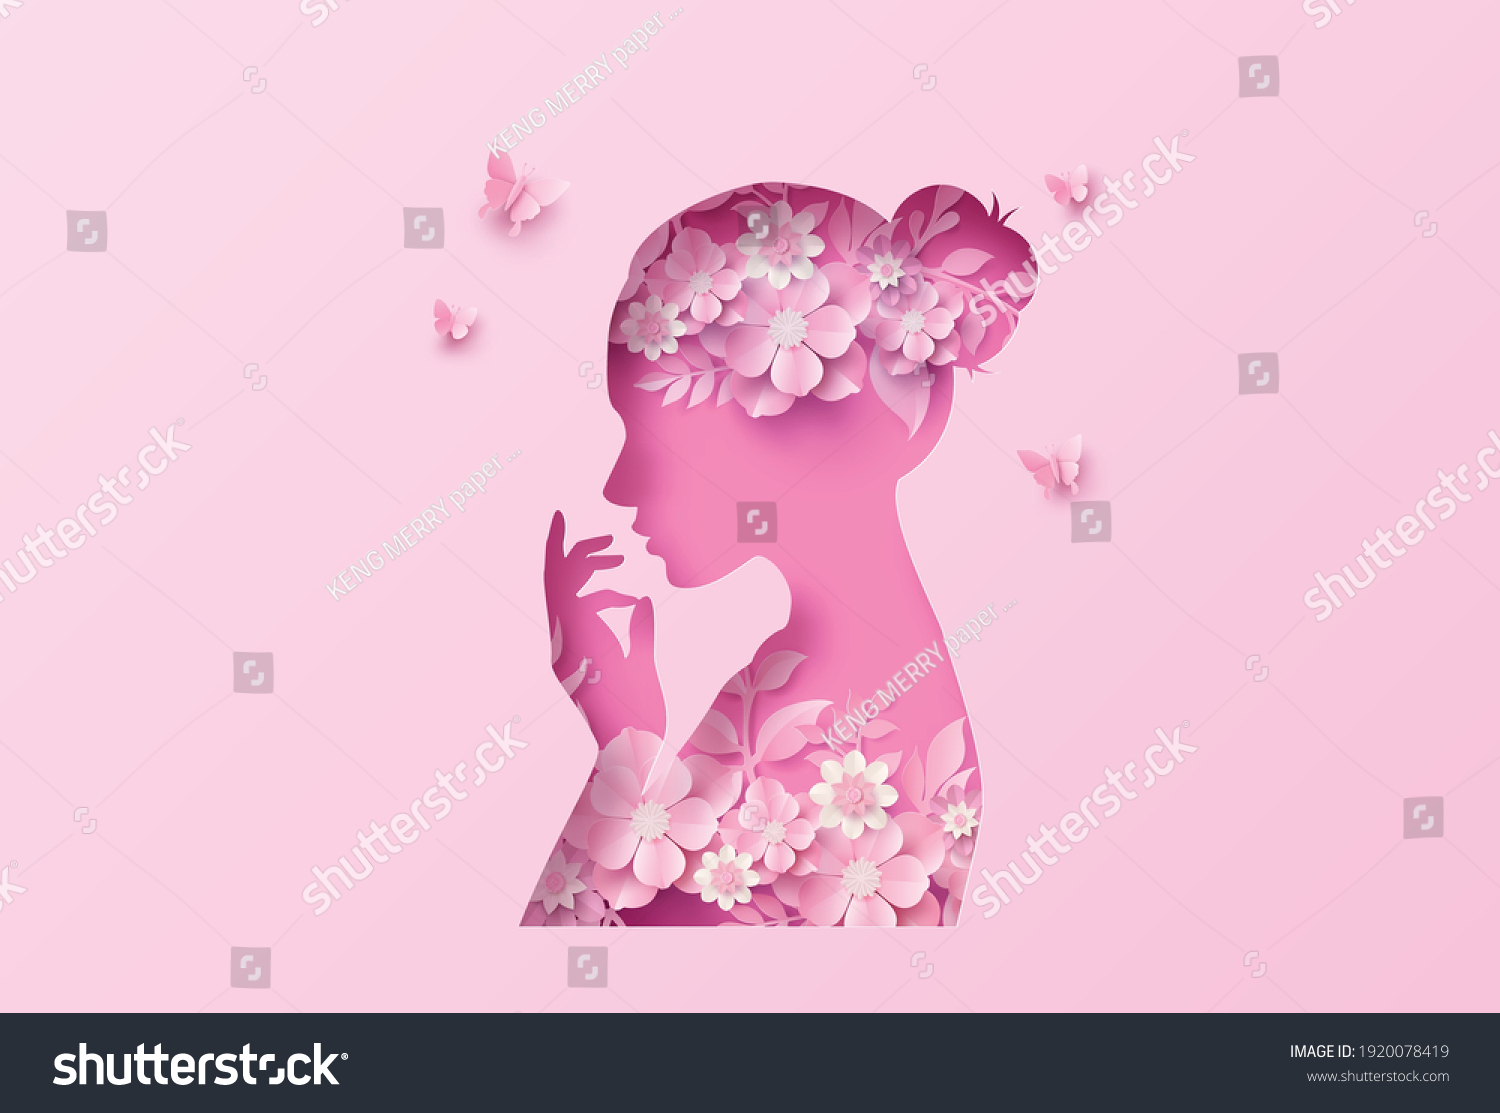 International Women's Day 8 march with frame of flower and leaves , Paper art style. #1920078419